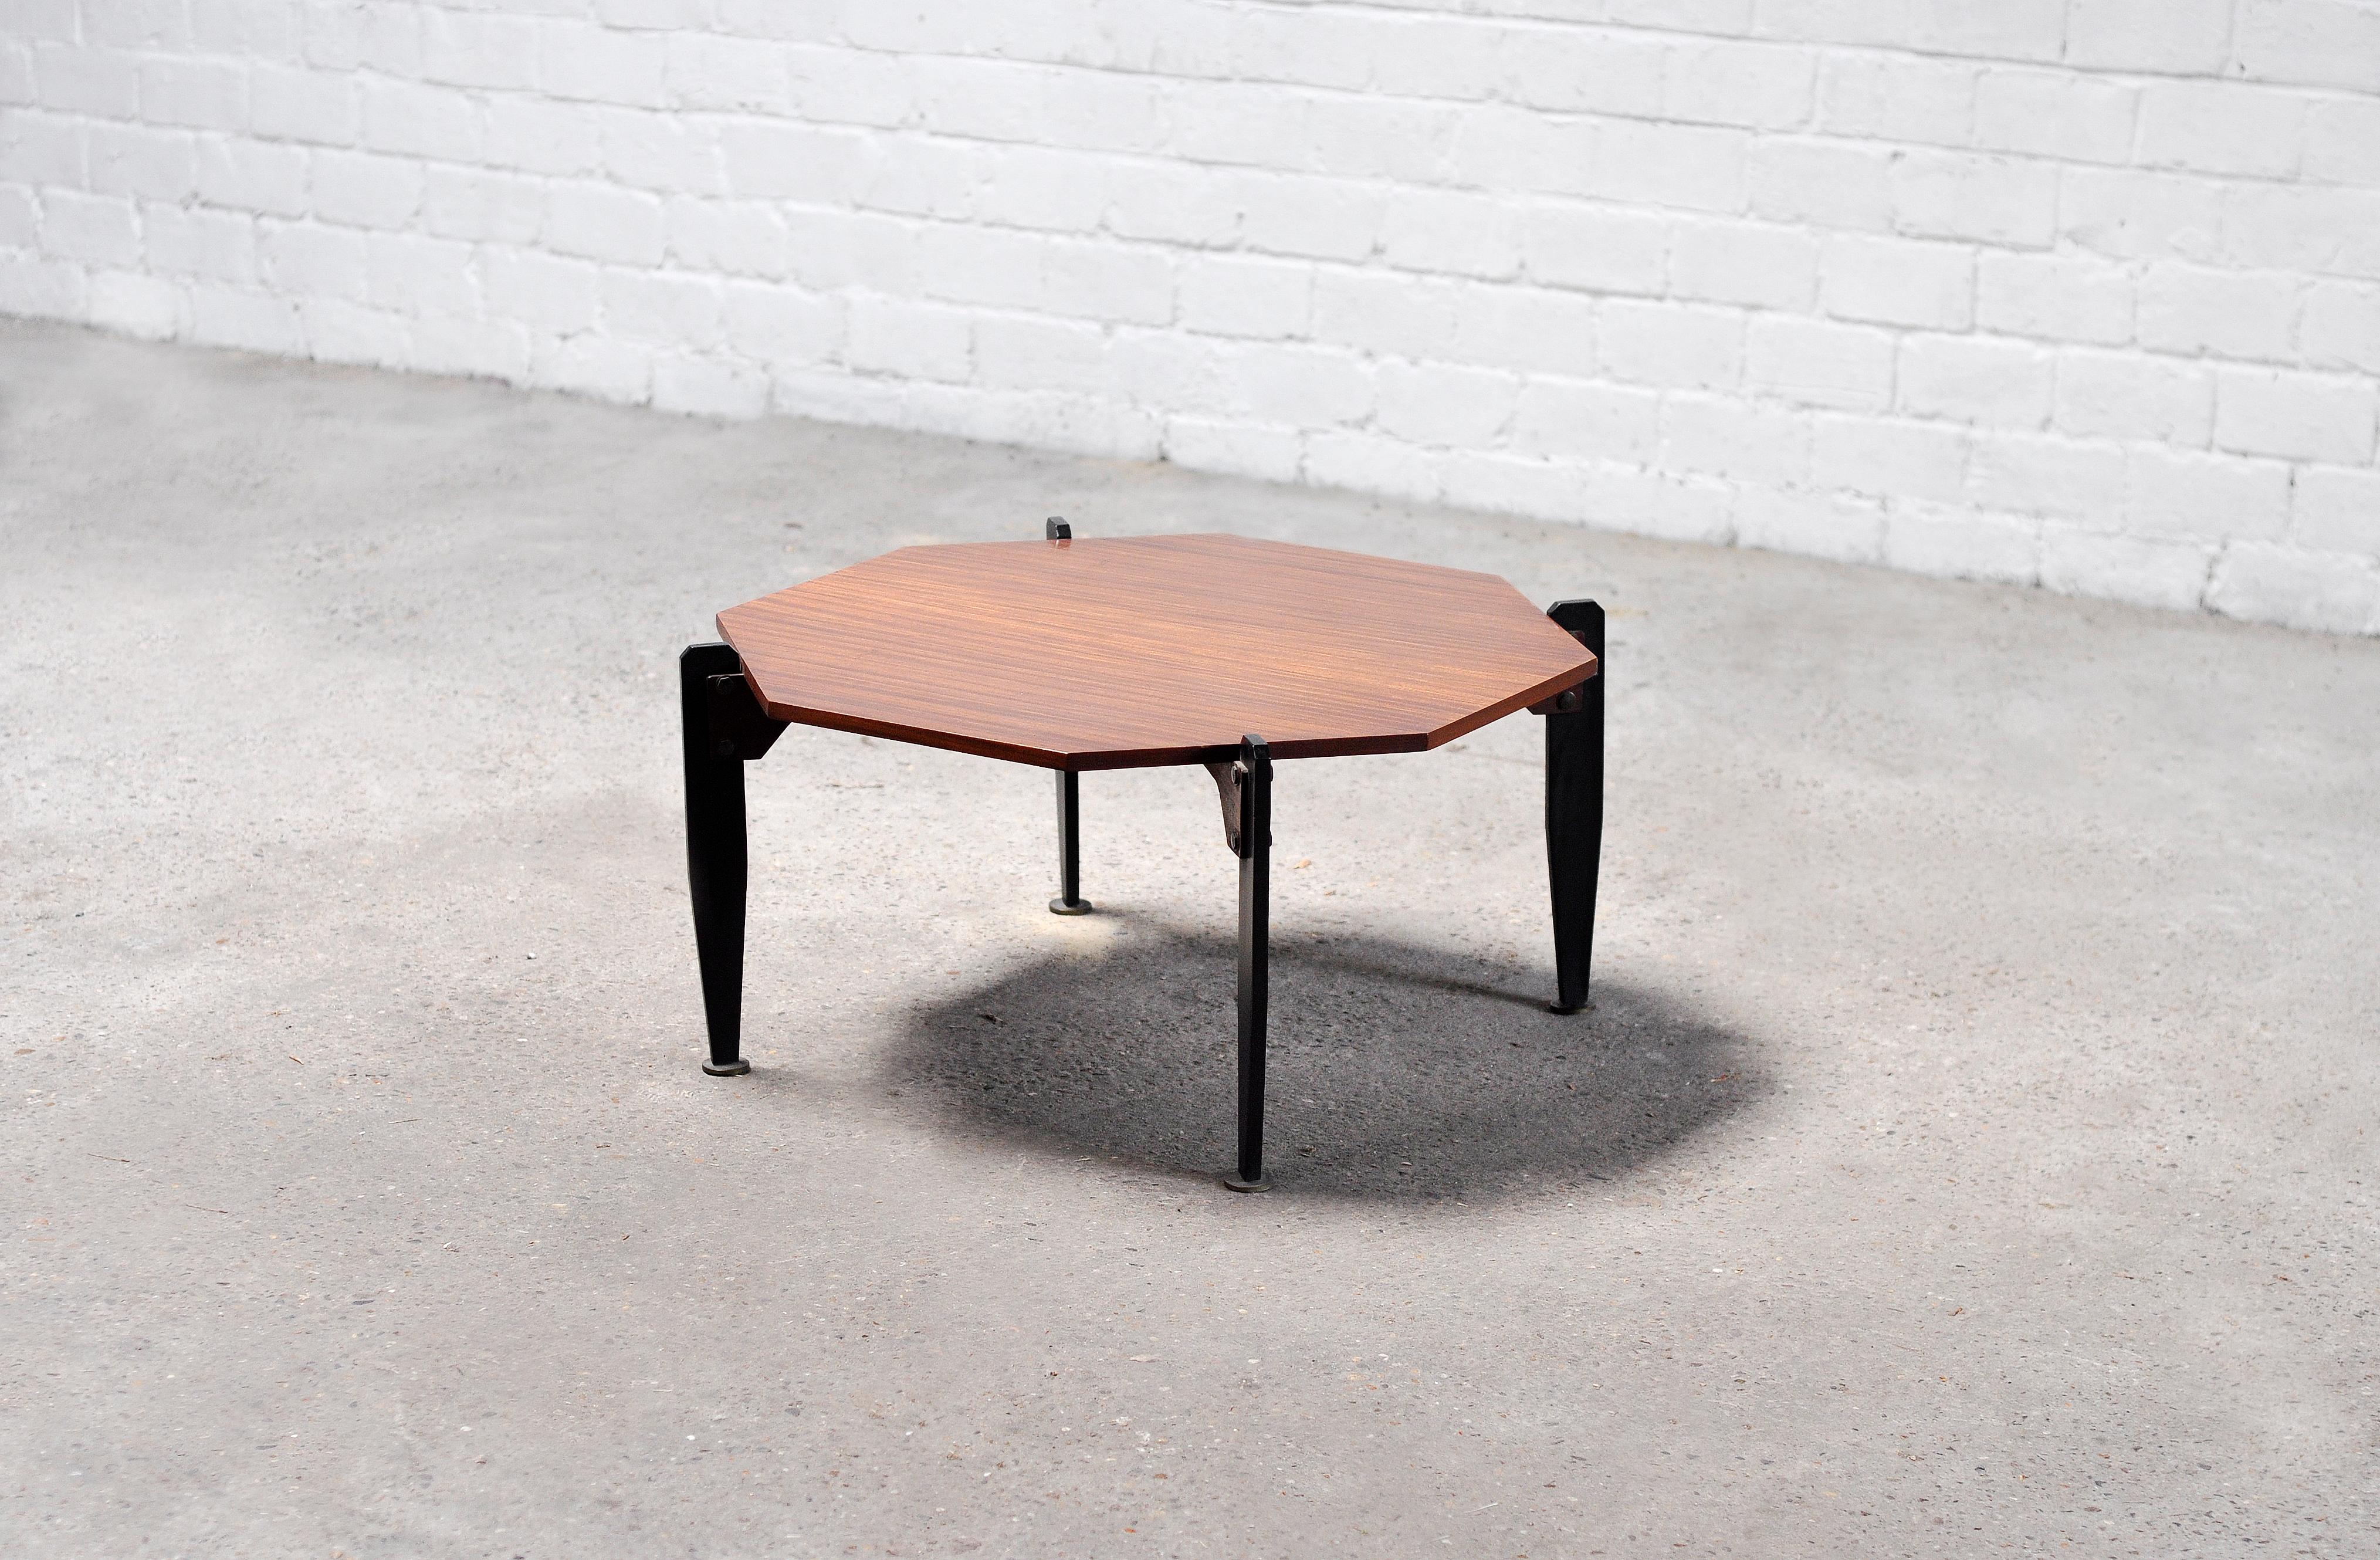 An early modernist coffee or cocktail table produced in Italy, 1950s. Executed with very elegant and typical modernist details including sculptural lacquered metal legs, an octagonal teak top, and round brass tips. This piece is yet to be